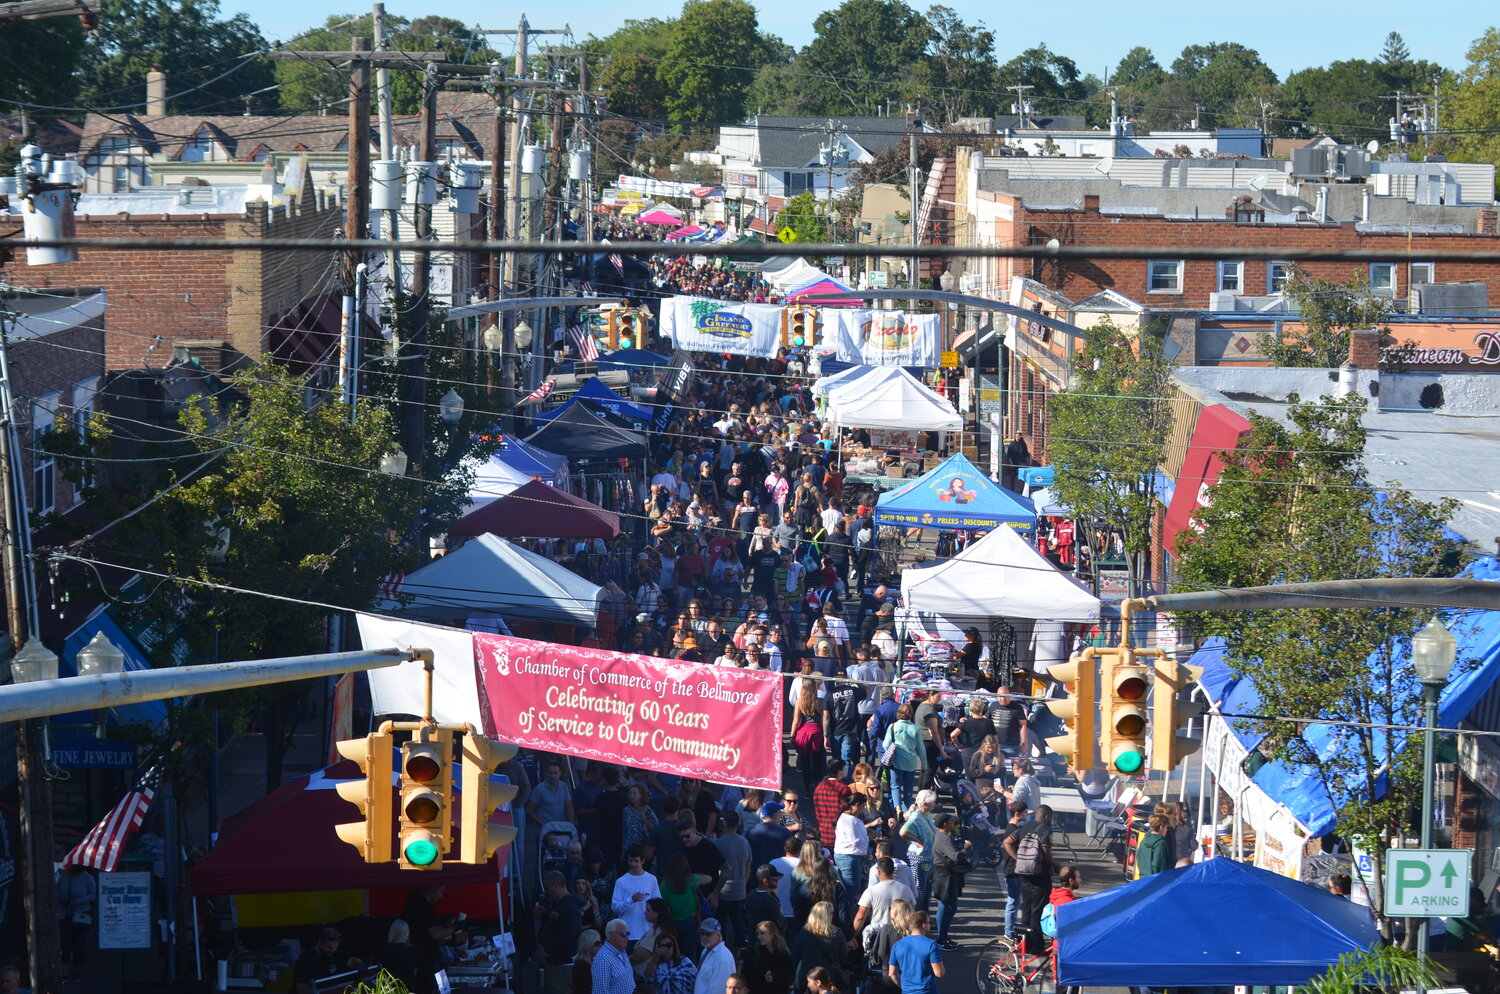 The Bellmore Family Street Festival was postponed due an inclement weather forecast, and will kick of next month on Oct. 26.